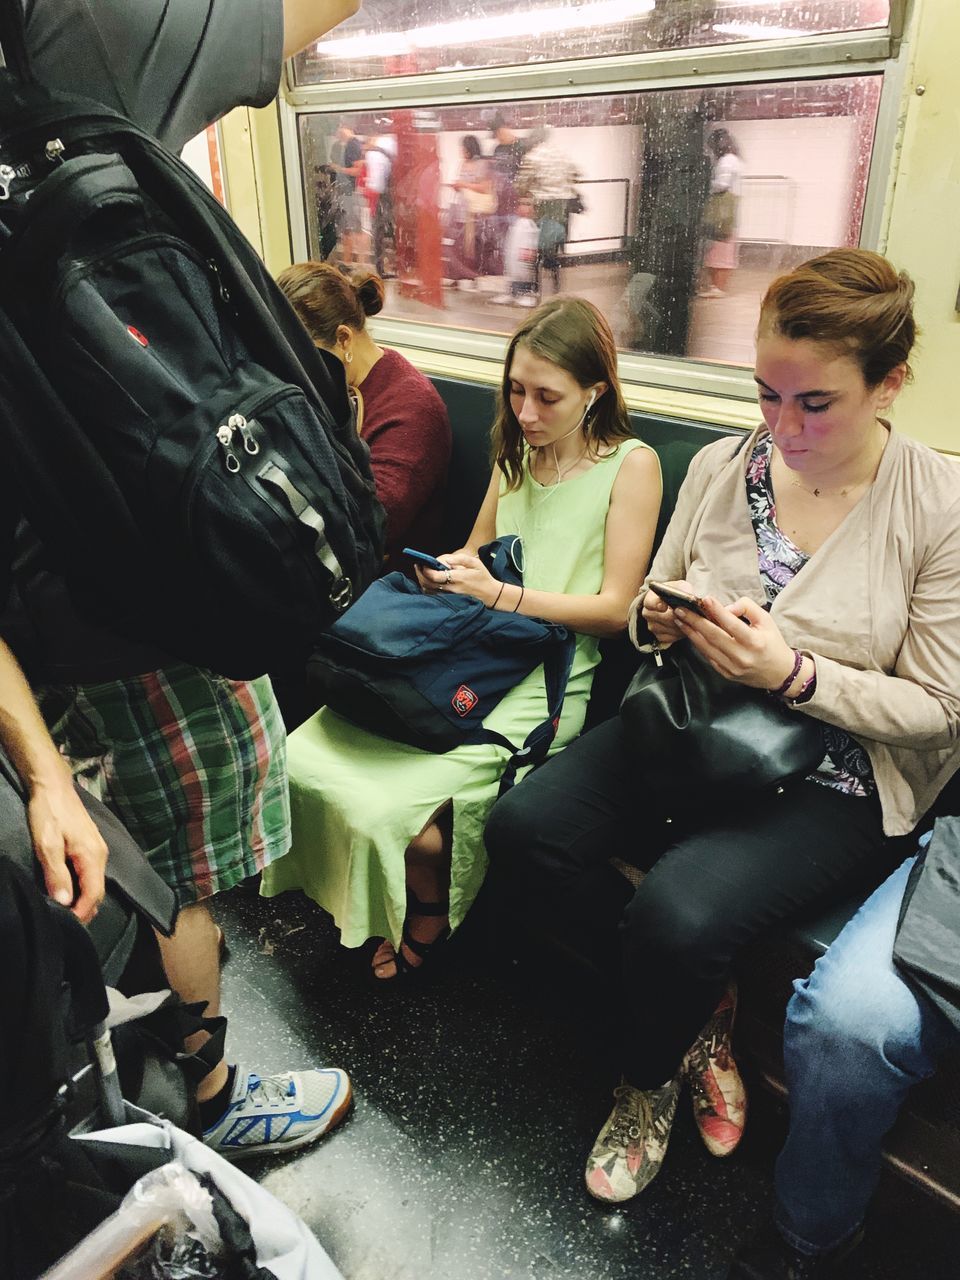 sitting, full length, casual clothing, mode of transportation, transportation, women, travel, public transportation, real people, people, group of people, adult, bag, lifestyles, technology, young adult, young women, mobile phone, vehicle interior, communication, subway train